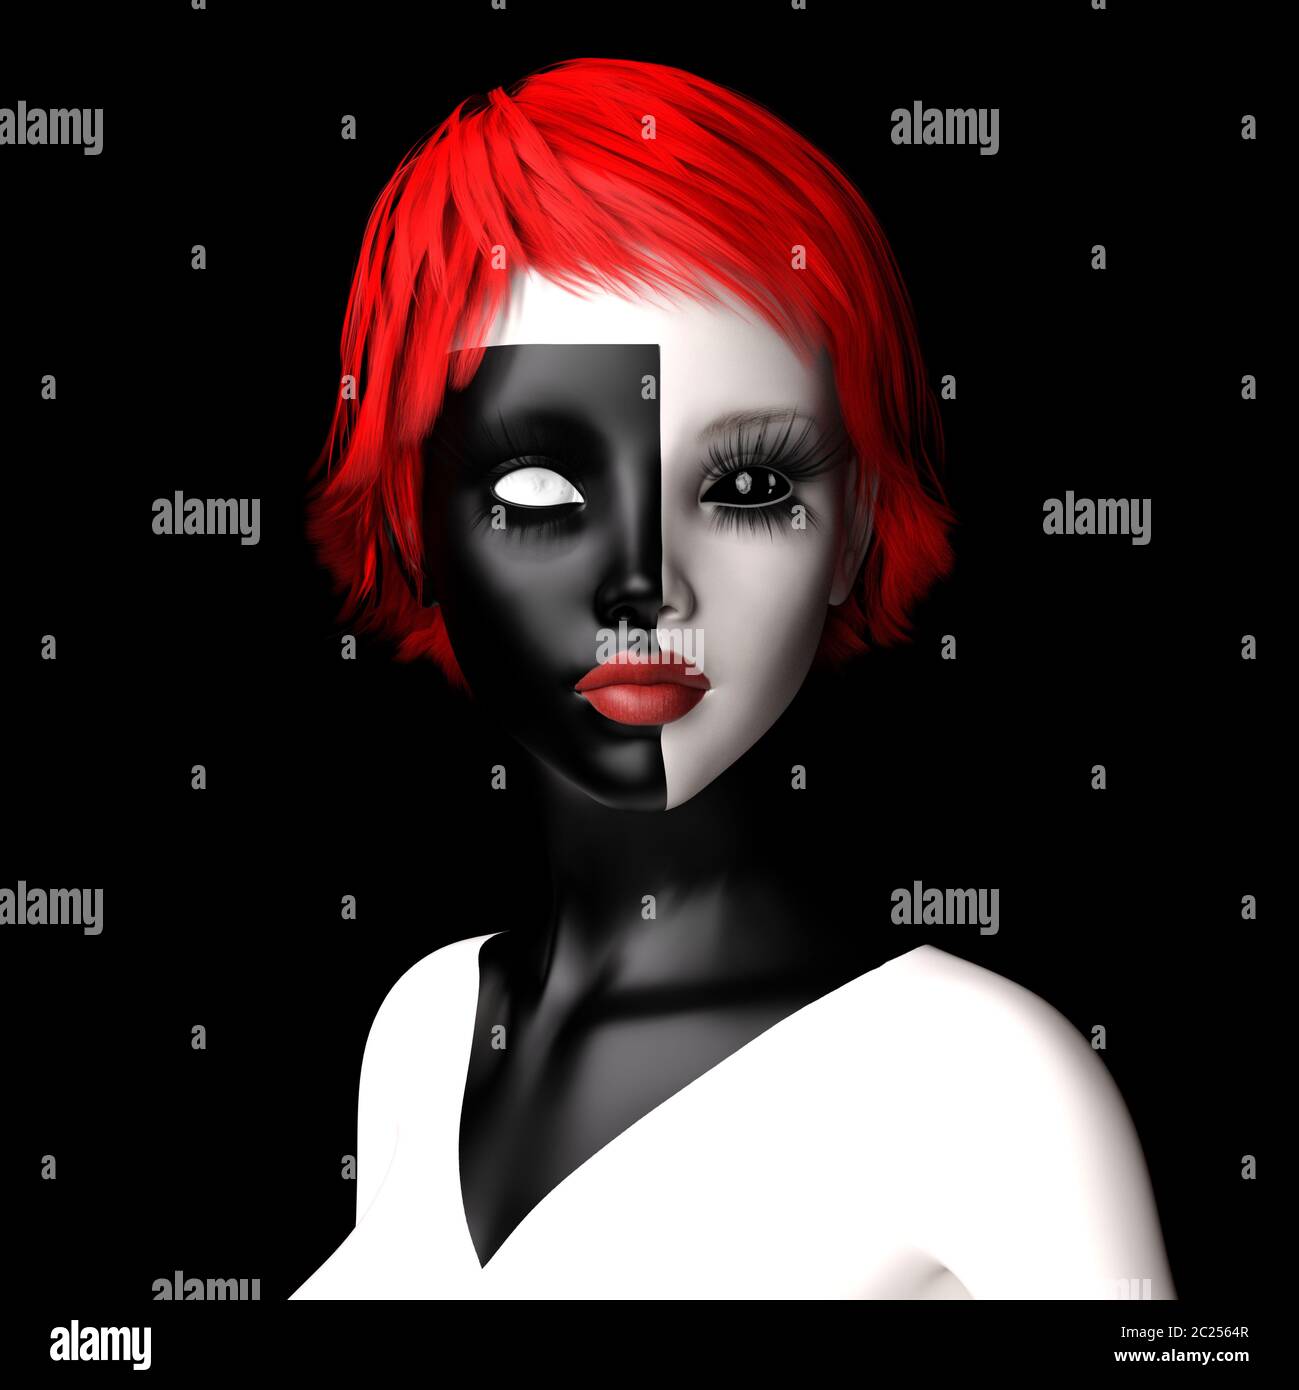 Digital 3D Illustration of a Female in Black and White Stock Photo